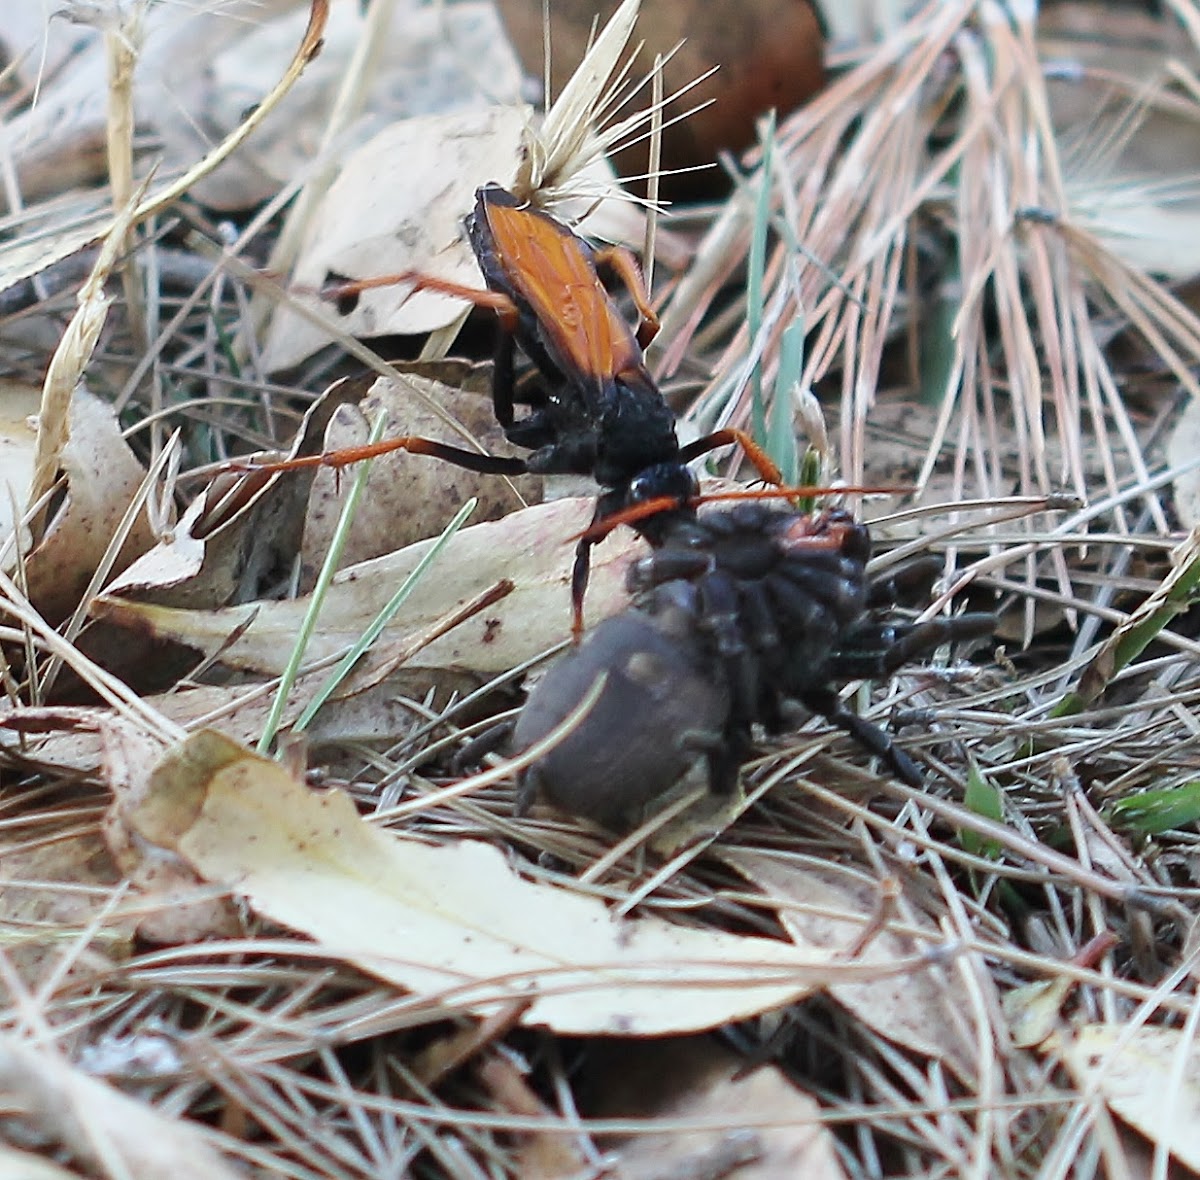 Spider-hunting Wasp with prey